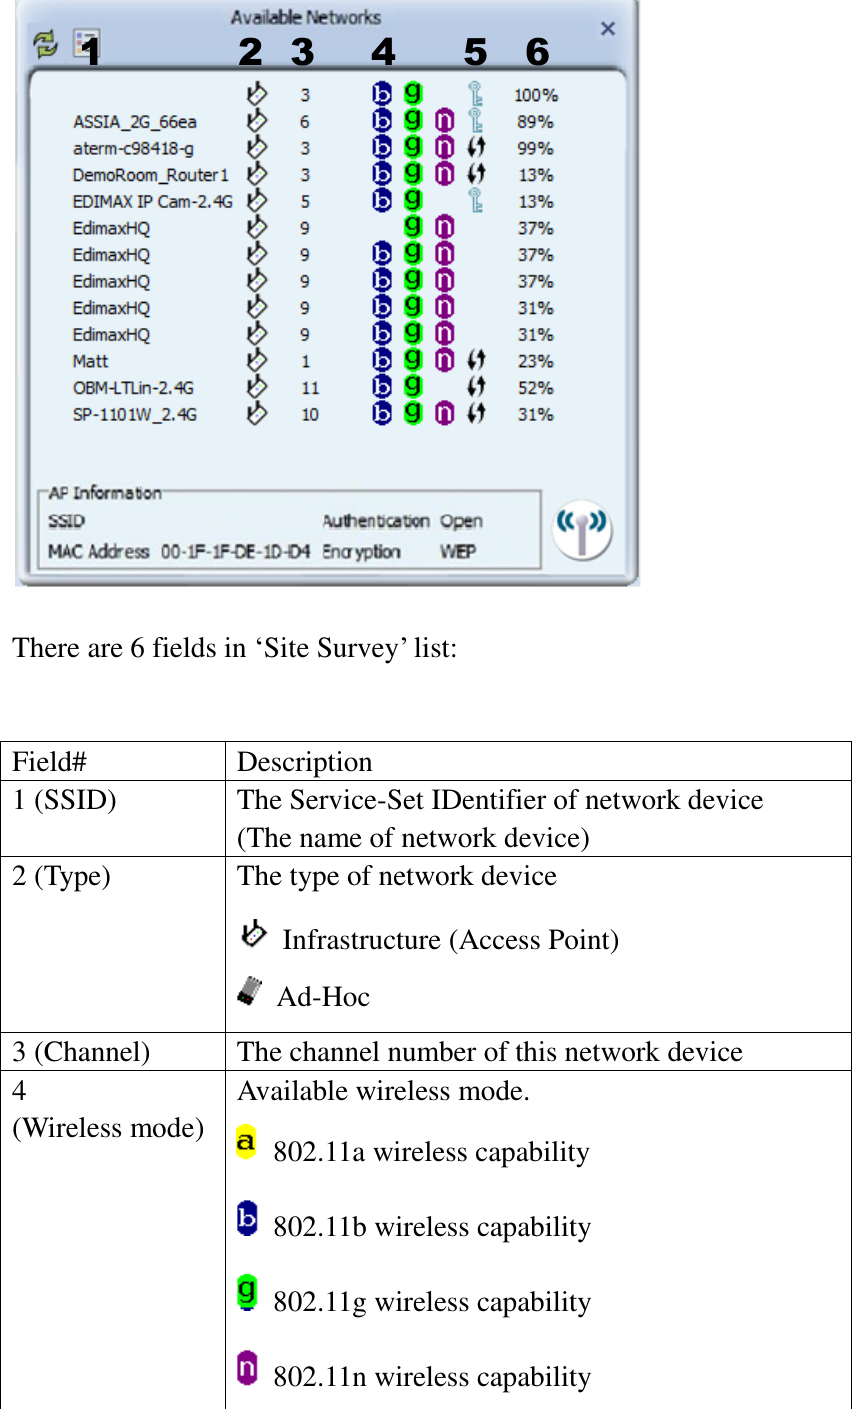   There are 6 fields in ‘Site Survey’ list:   Field# Description 1 (SSID) The Service-Set IDentifier of network device (The name of network device) 2 (Type) The type of network device   Infrastructure (Access Point)  Ad-Hoc 3 (Channel) The channel number of this network device 4 (Wireless mode) Available wireless mode.   802.11a wireless capability   802.11b wireless capability   802.11g wireless capability   802.11n wireless capability 2 3 4 5 6 1 2 4 3 5 6 